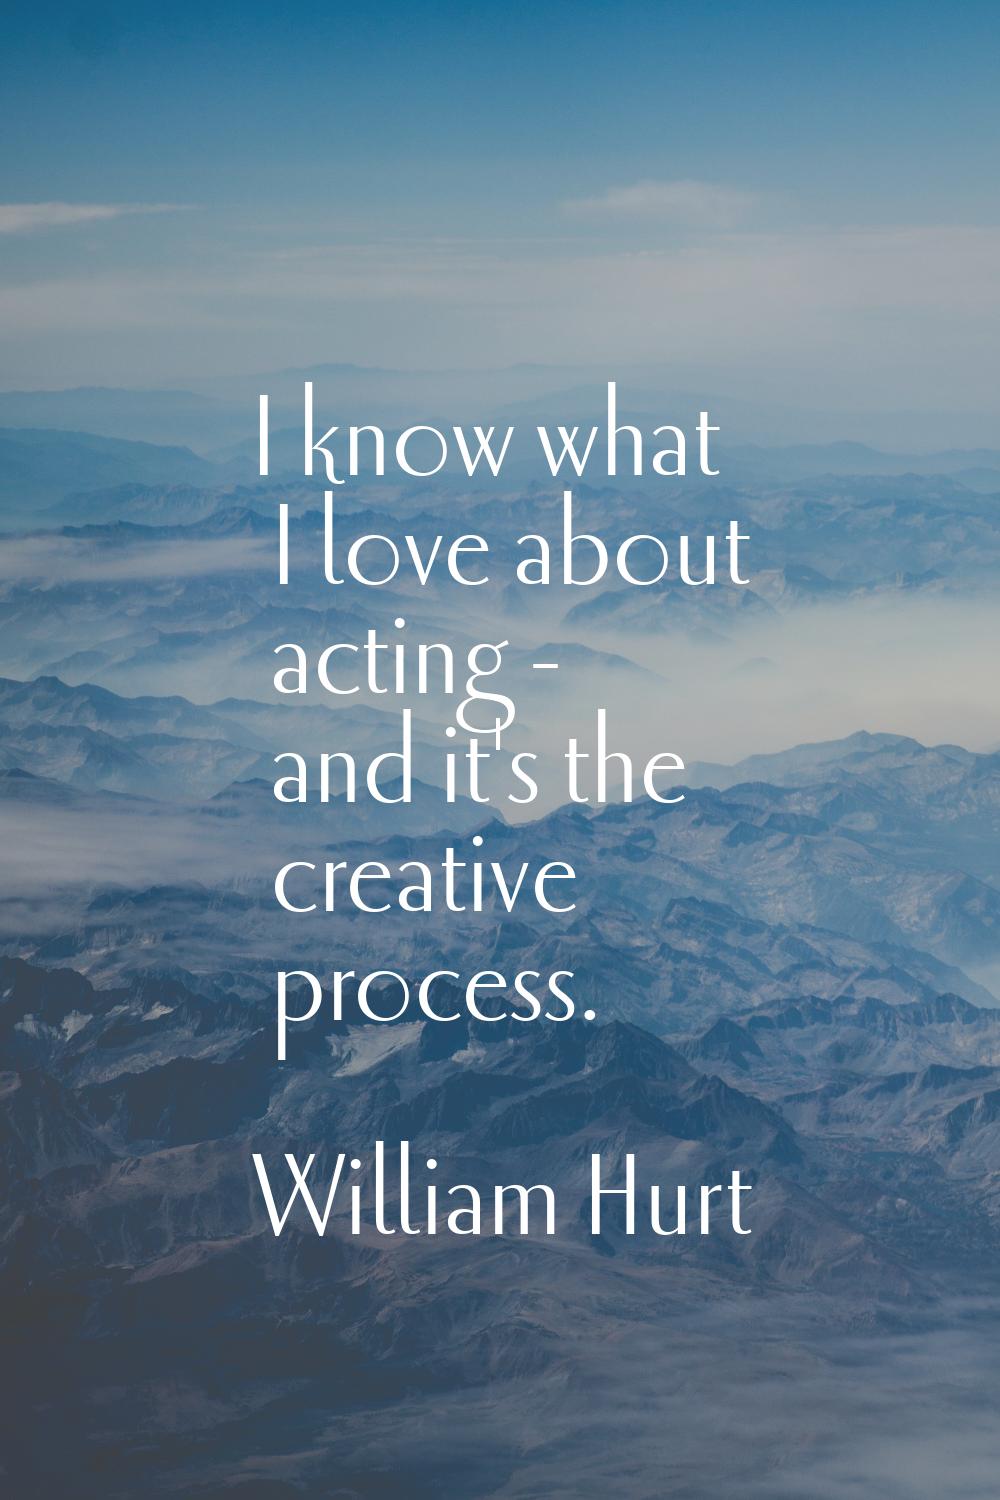 I know what I love about acting - and it's the creative process.